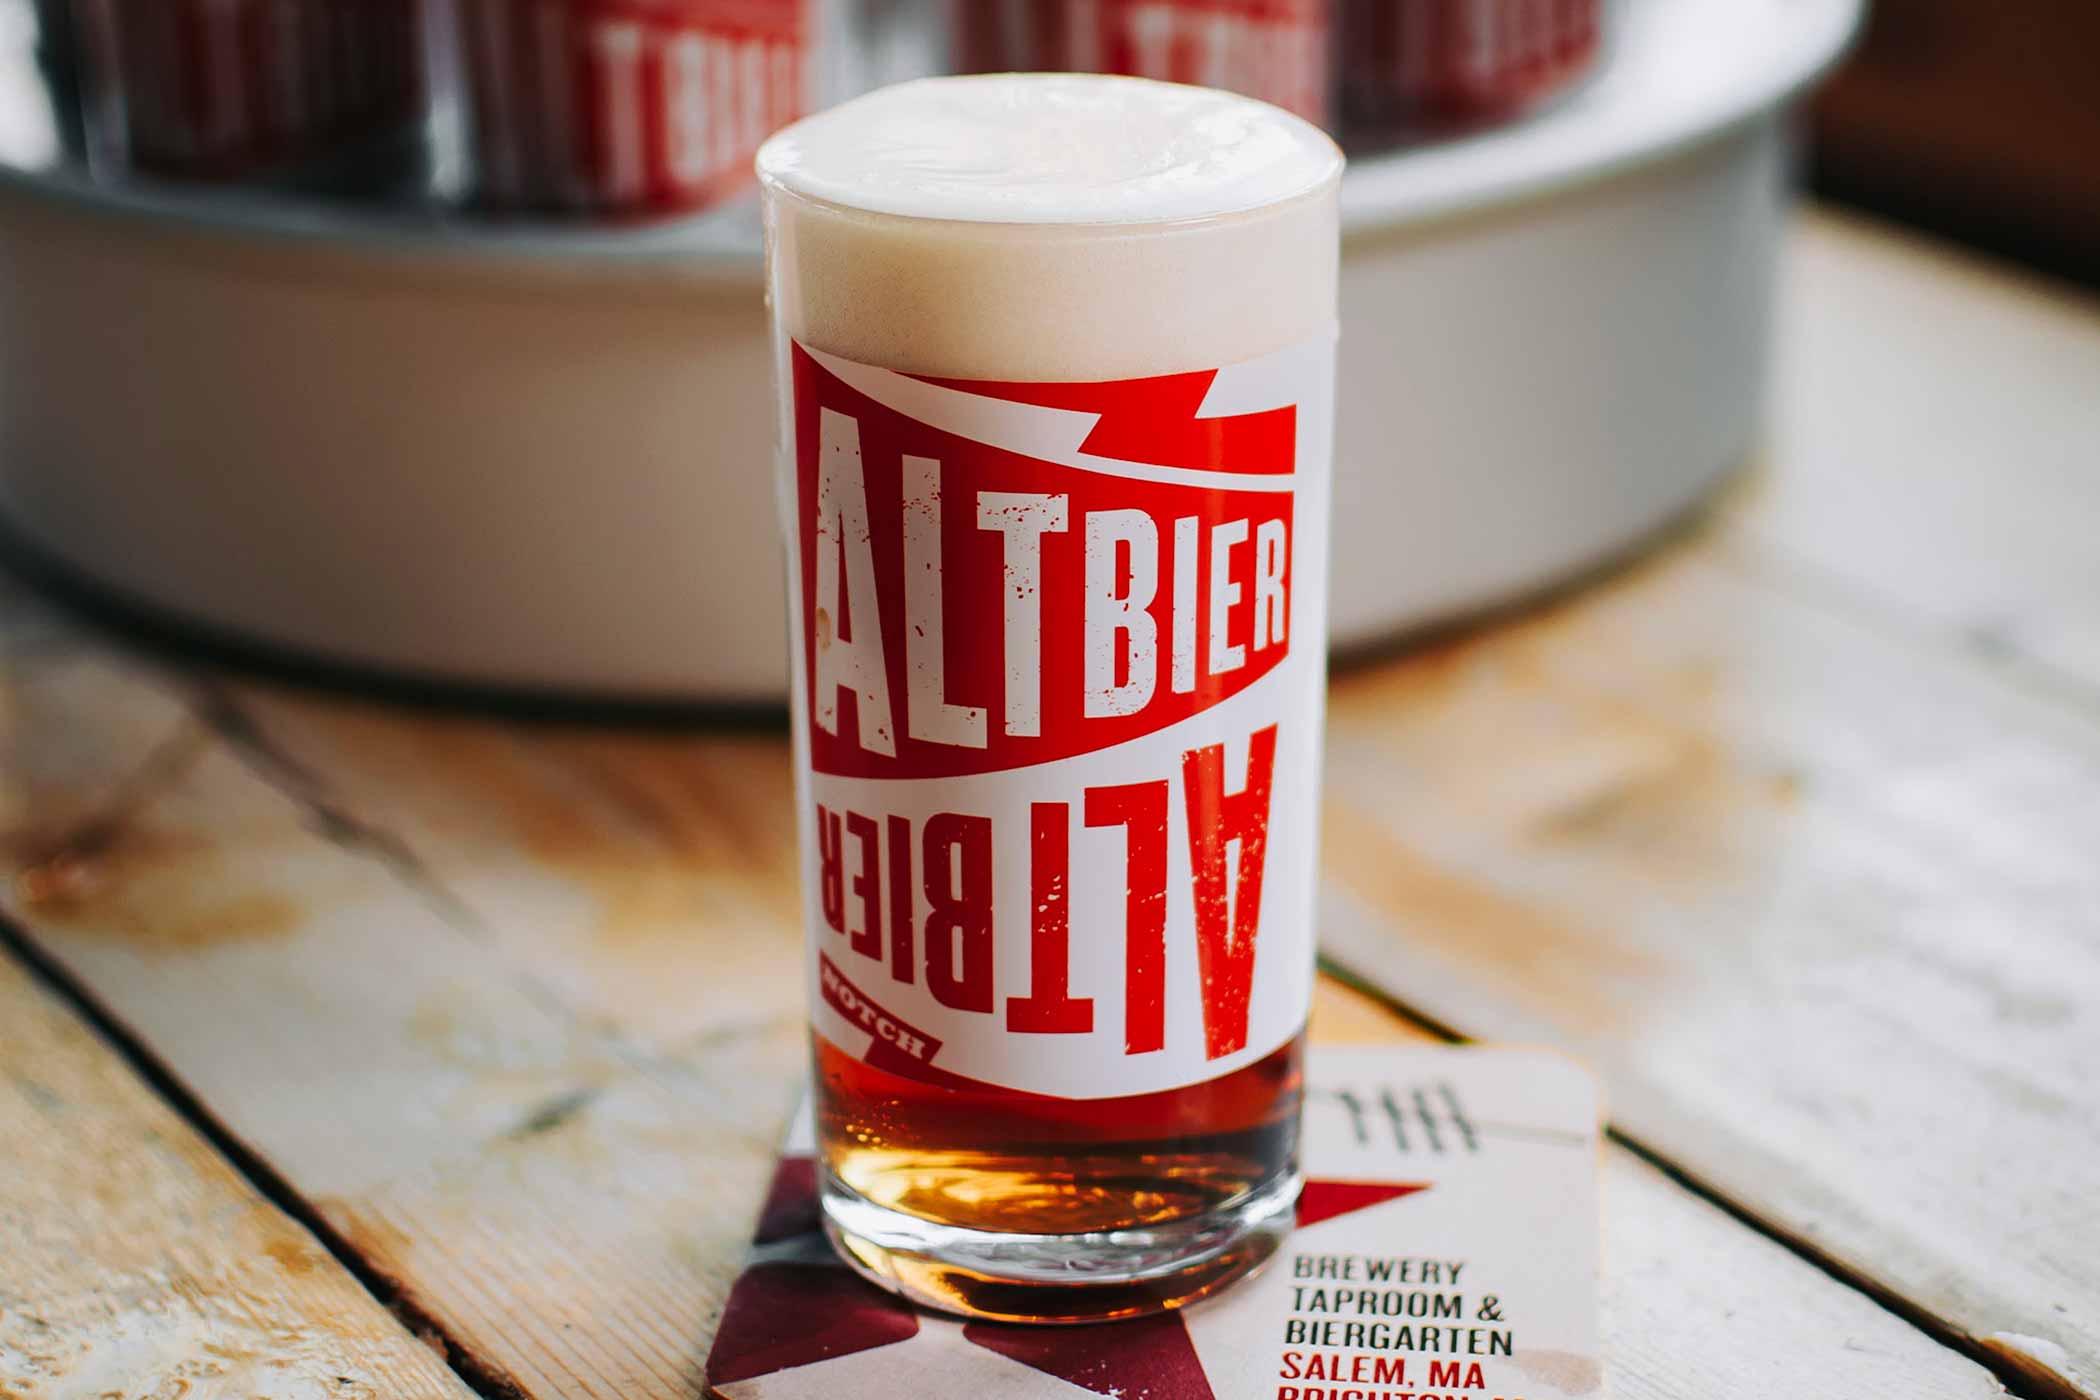 What Exactly Is an Altbier? We Asked the Experts